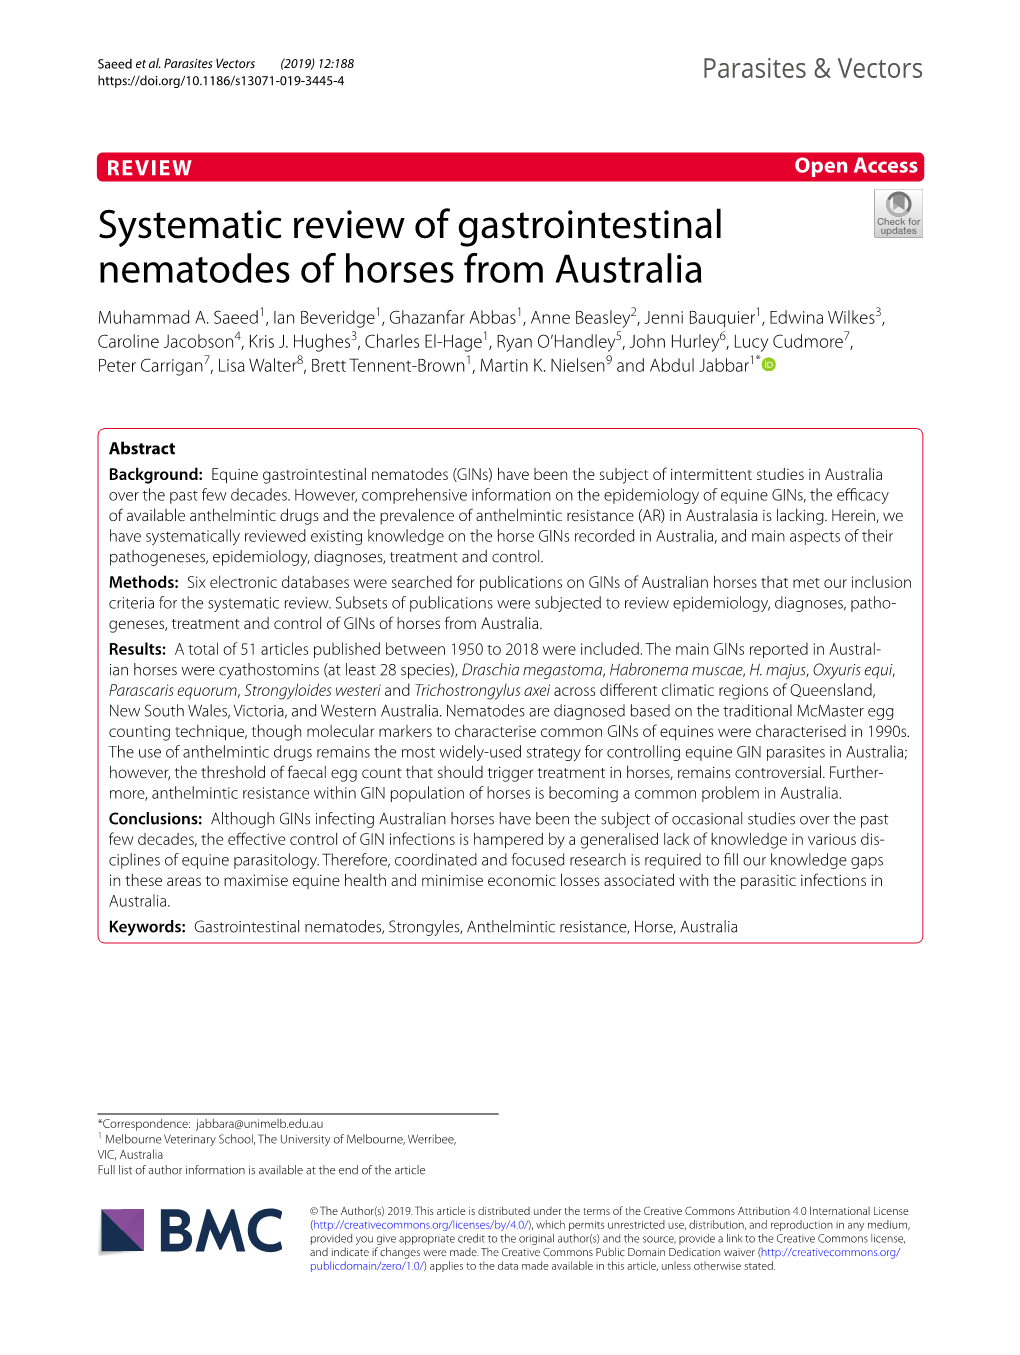 Systematic Review of Gastrointestinal Nematodes of Horses from Australia Muhammad A